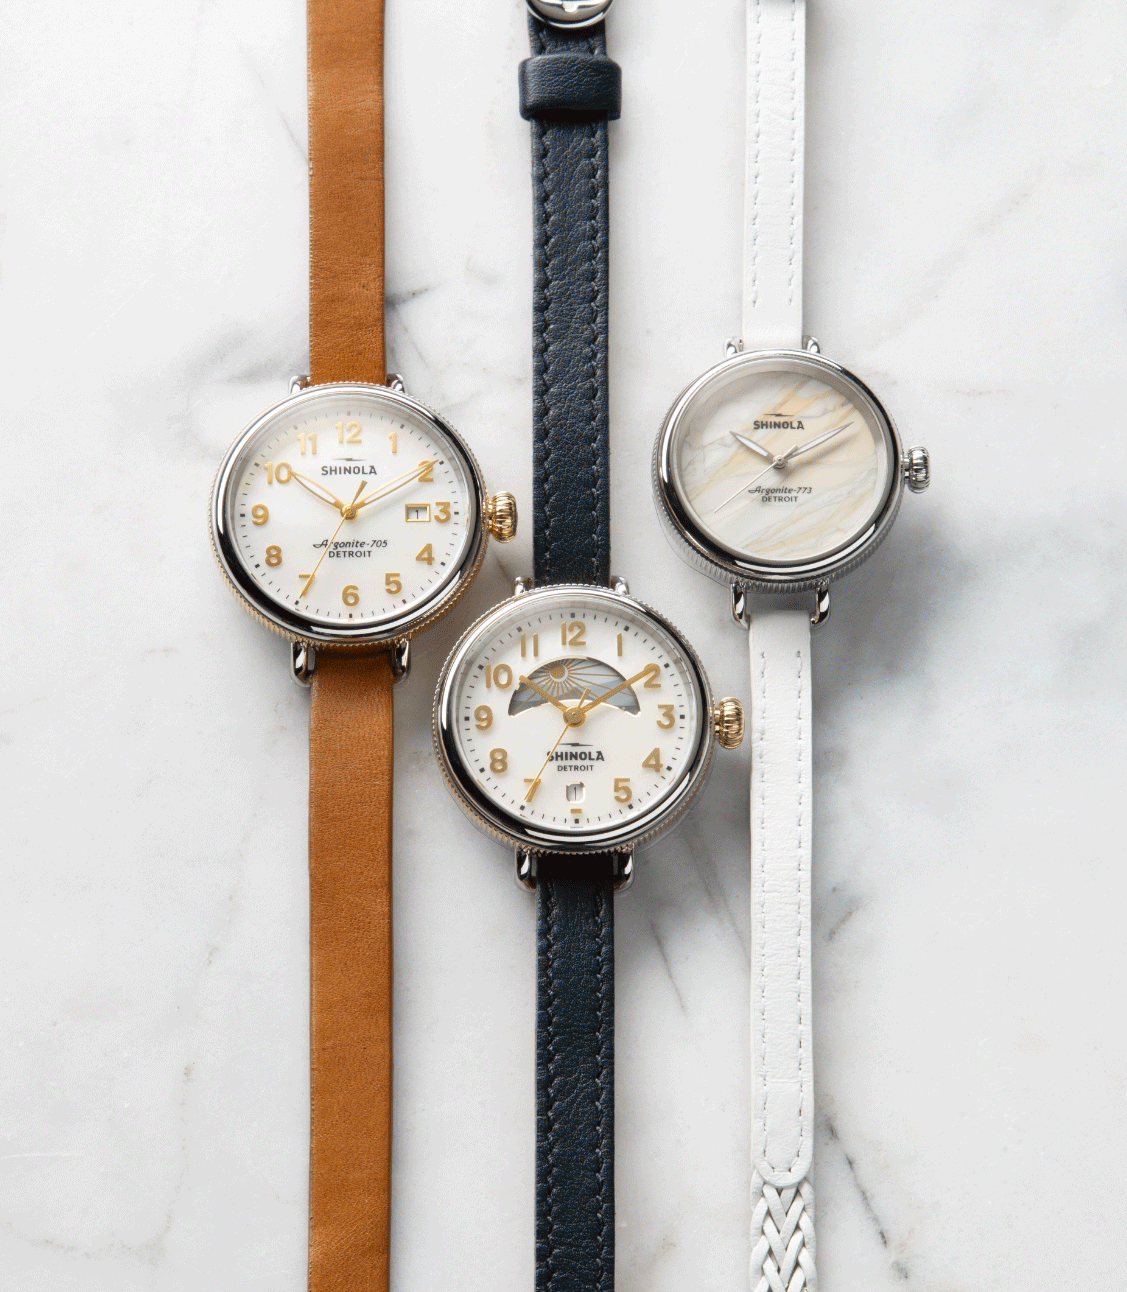 Collection of Shinola products rotating through